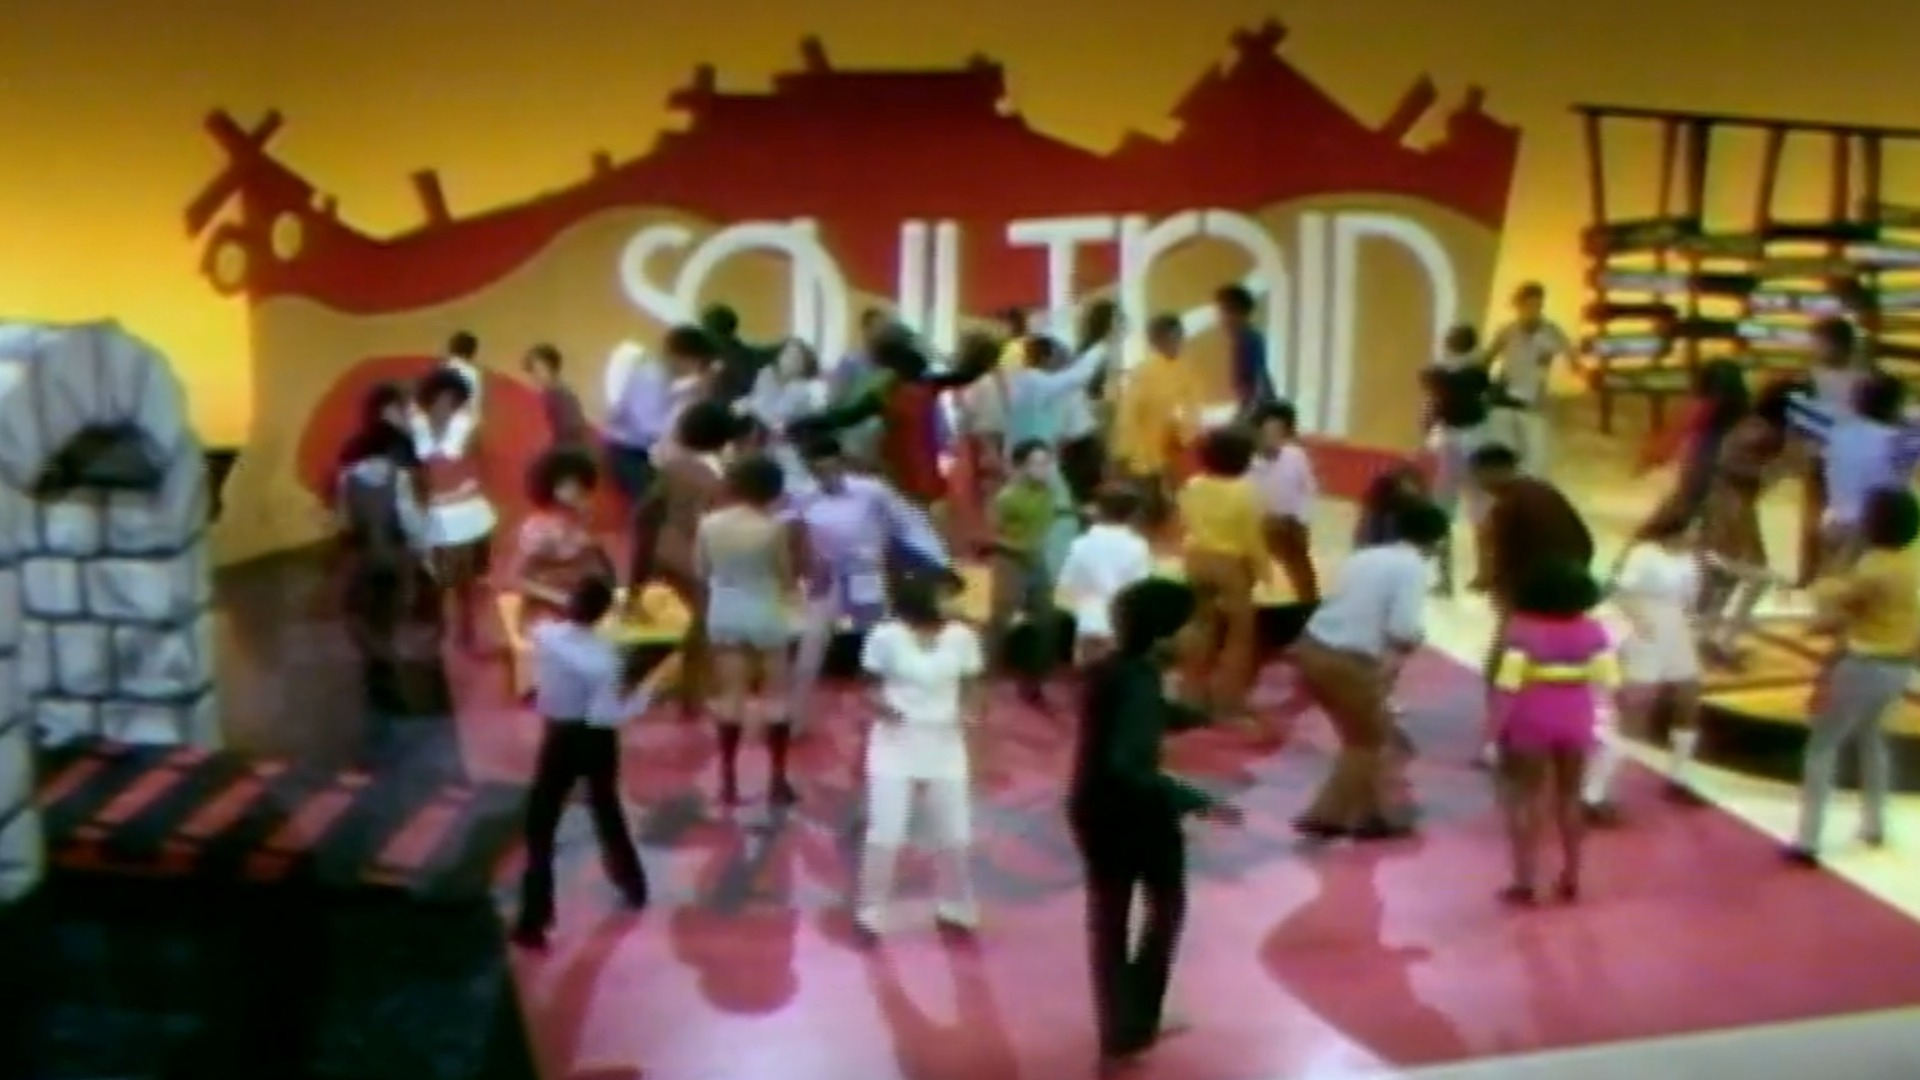 Watch "Soul Train" marks 50th anniversary Full show on CBS